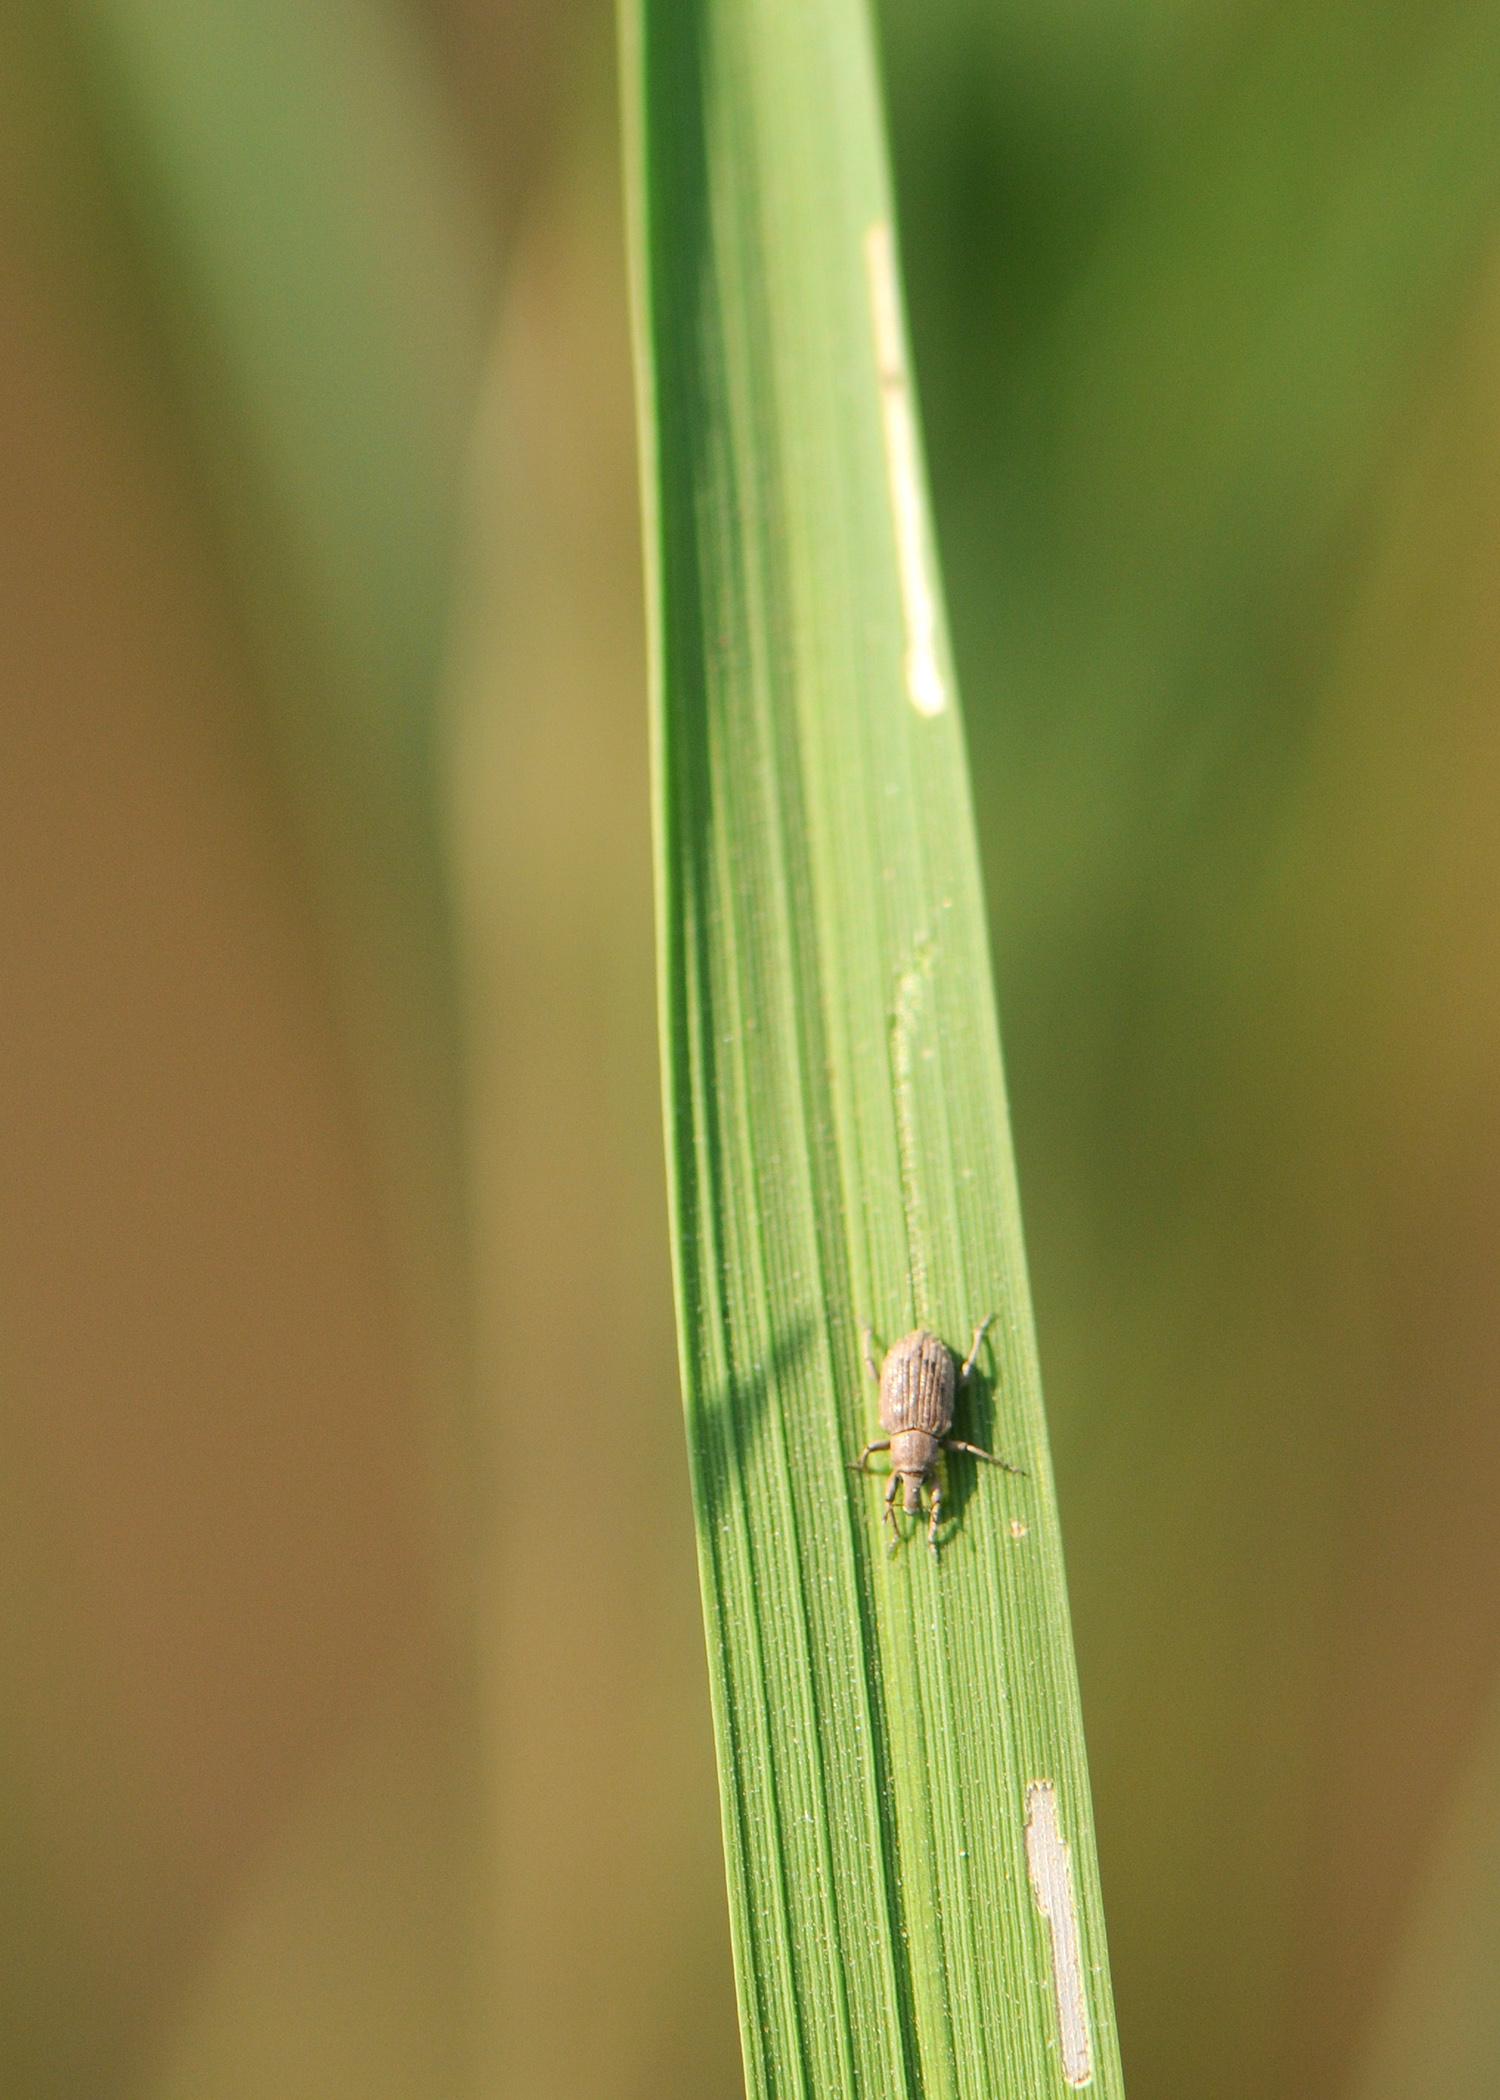 The rice water weevil, such as this adult on a rice leaf, is one of the most troublesome insect pests in rice, but seed treatments have proven to be effective in controlling them. The scars on the leaf are evidence of the rice water weevils' feeding. (Photo by Delta Research and Extension Center/Jeff Gore)